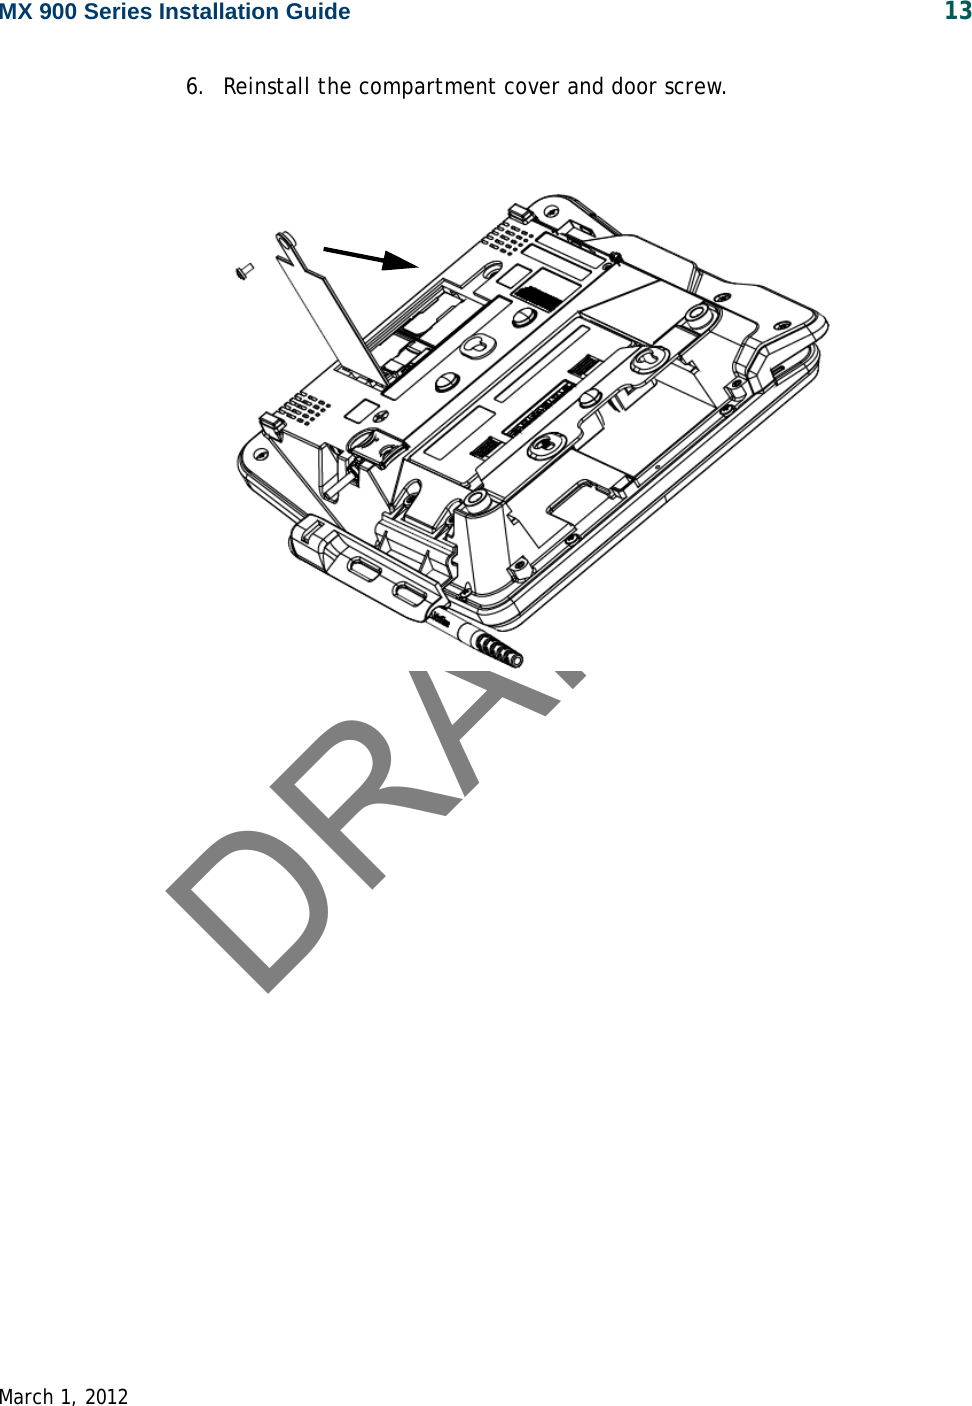 DRAFTMX 900 Series Installation Guide 13 March 1, 20126. Reinstall the compartment cover and door screw.